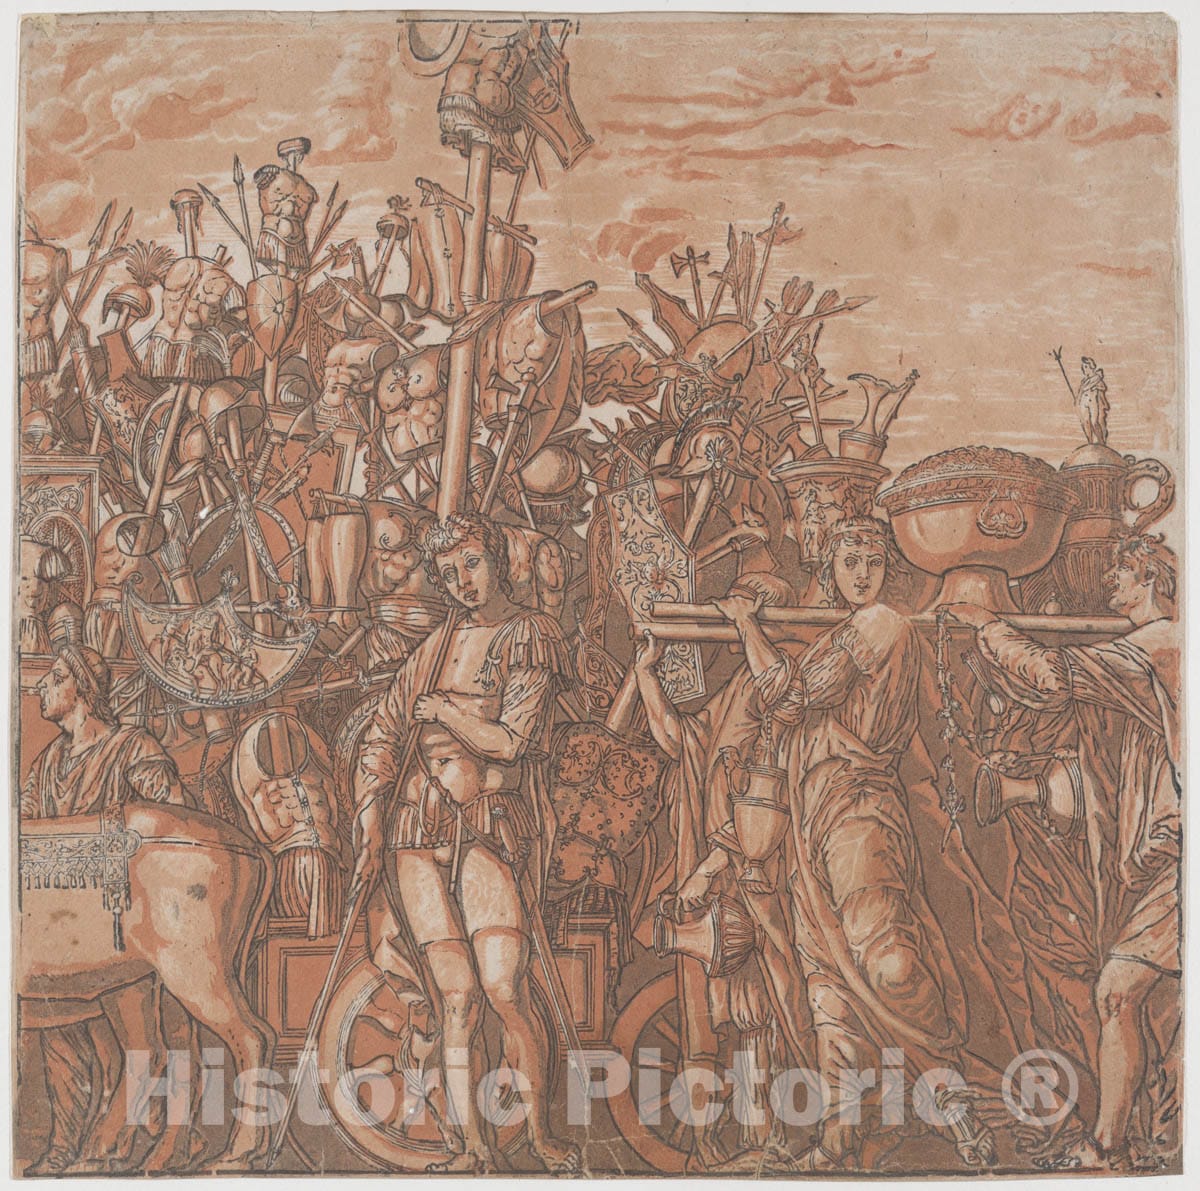 Art Print : Andrea Andreani - Sheet 3: The Trophies of war, from The Triumph of Julius Caesar : Vintage Wall Art